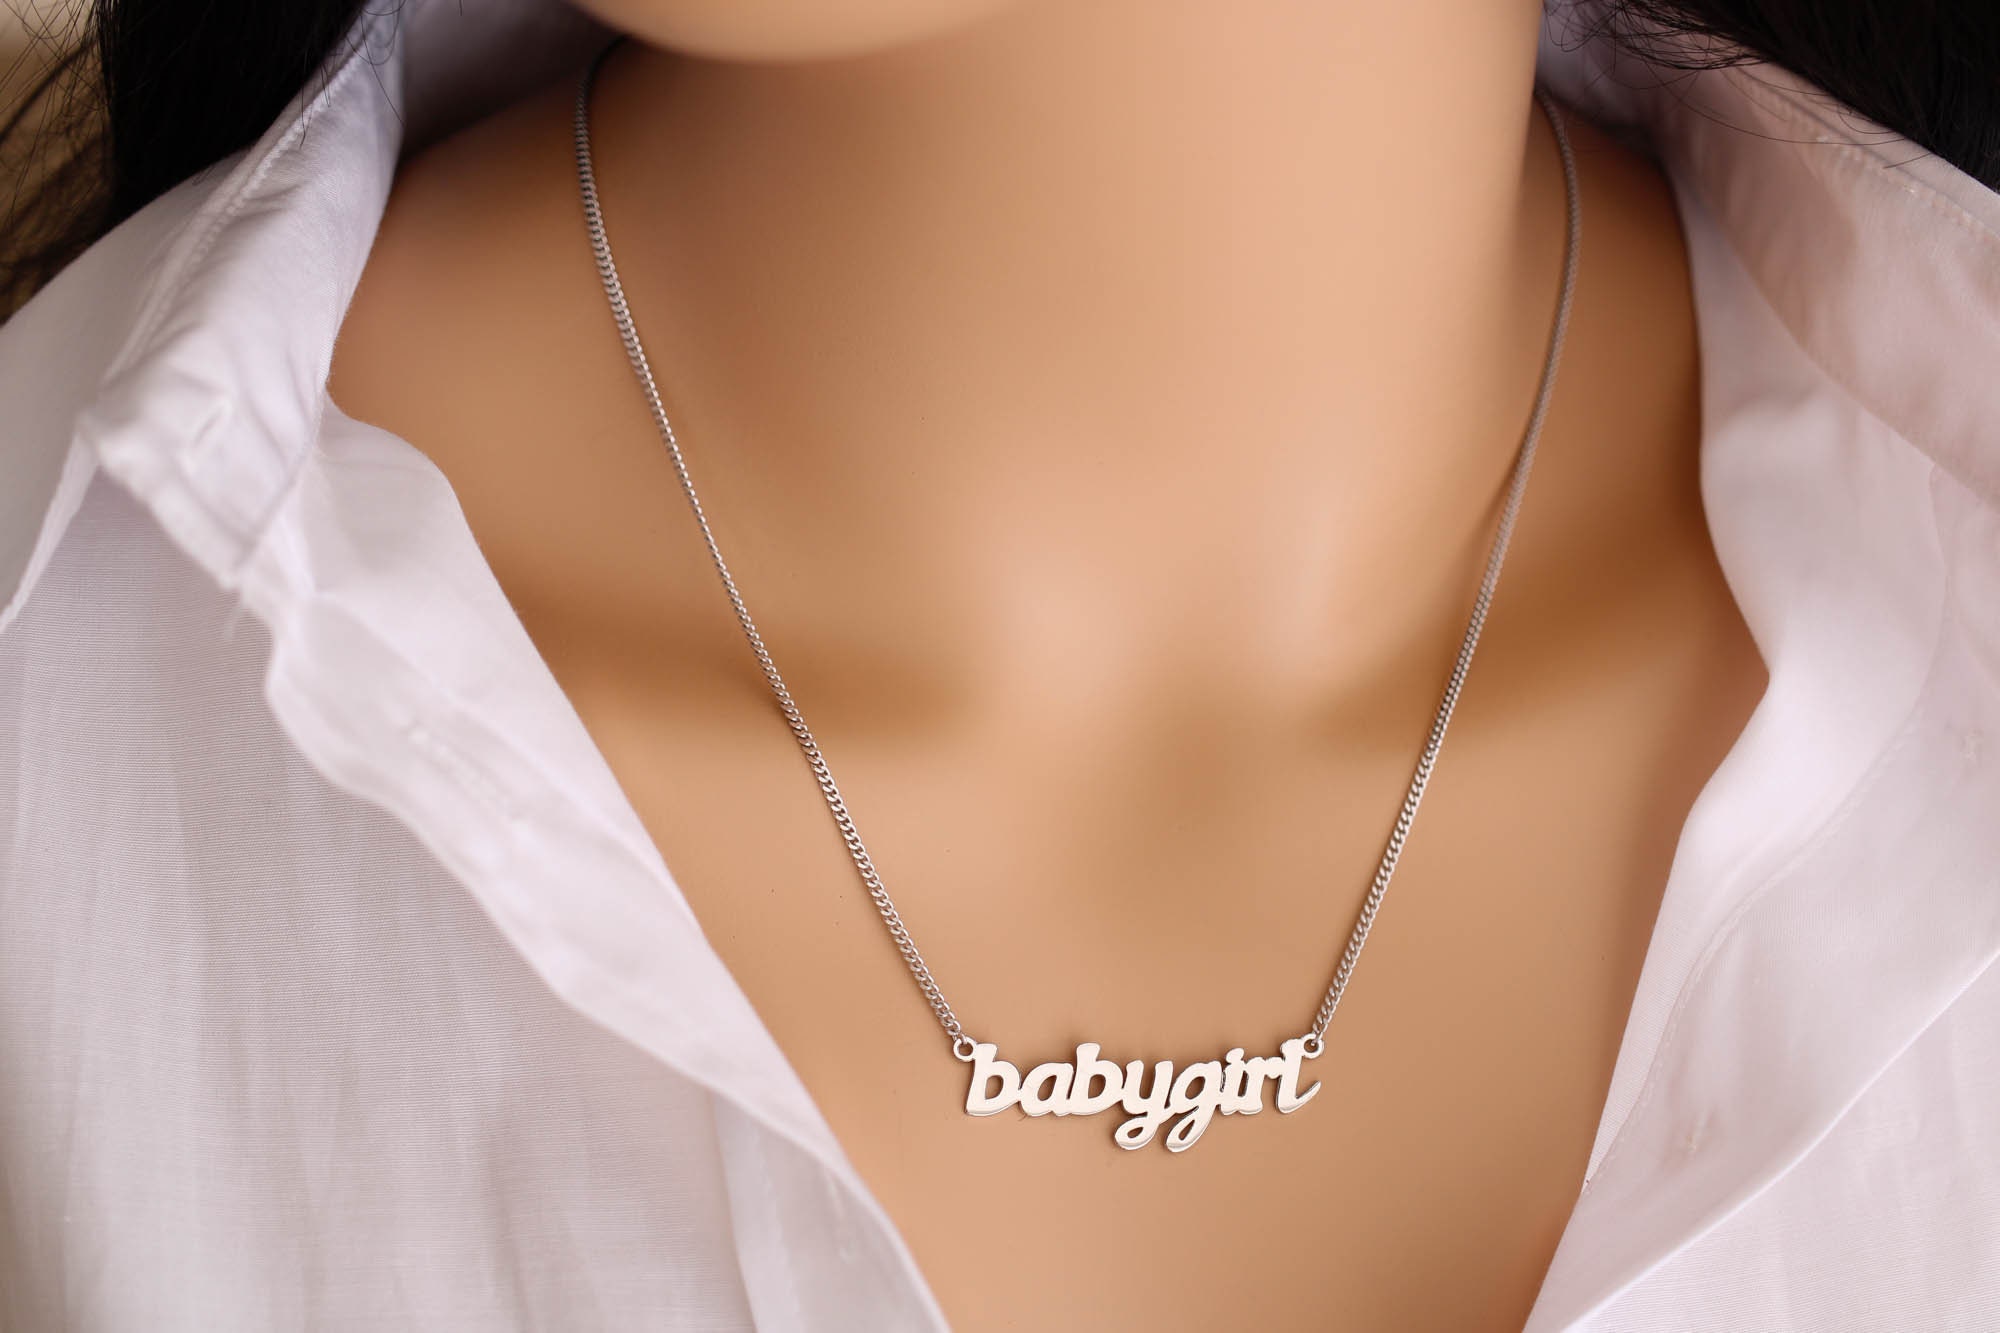 Baby Girl Necklace | The Diana Tracy Collection